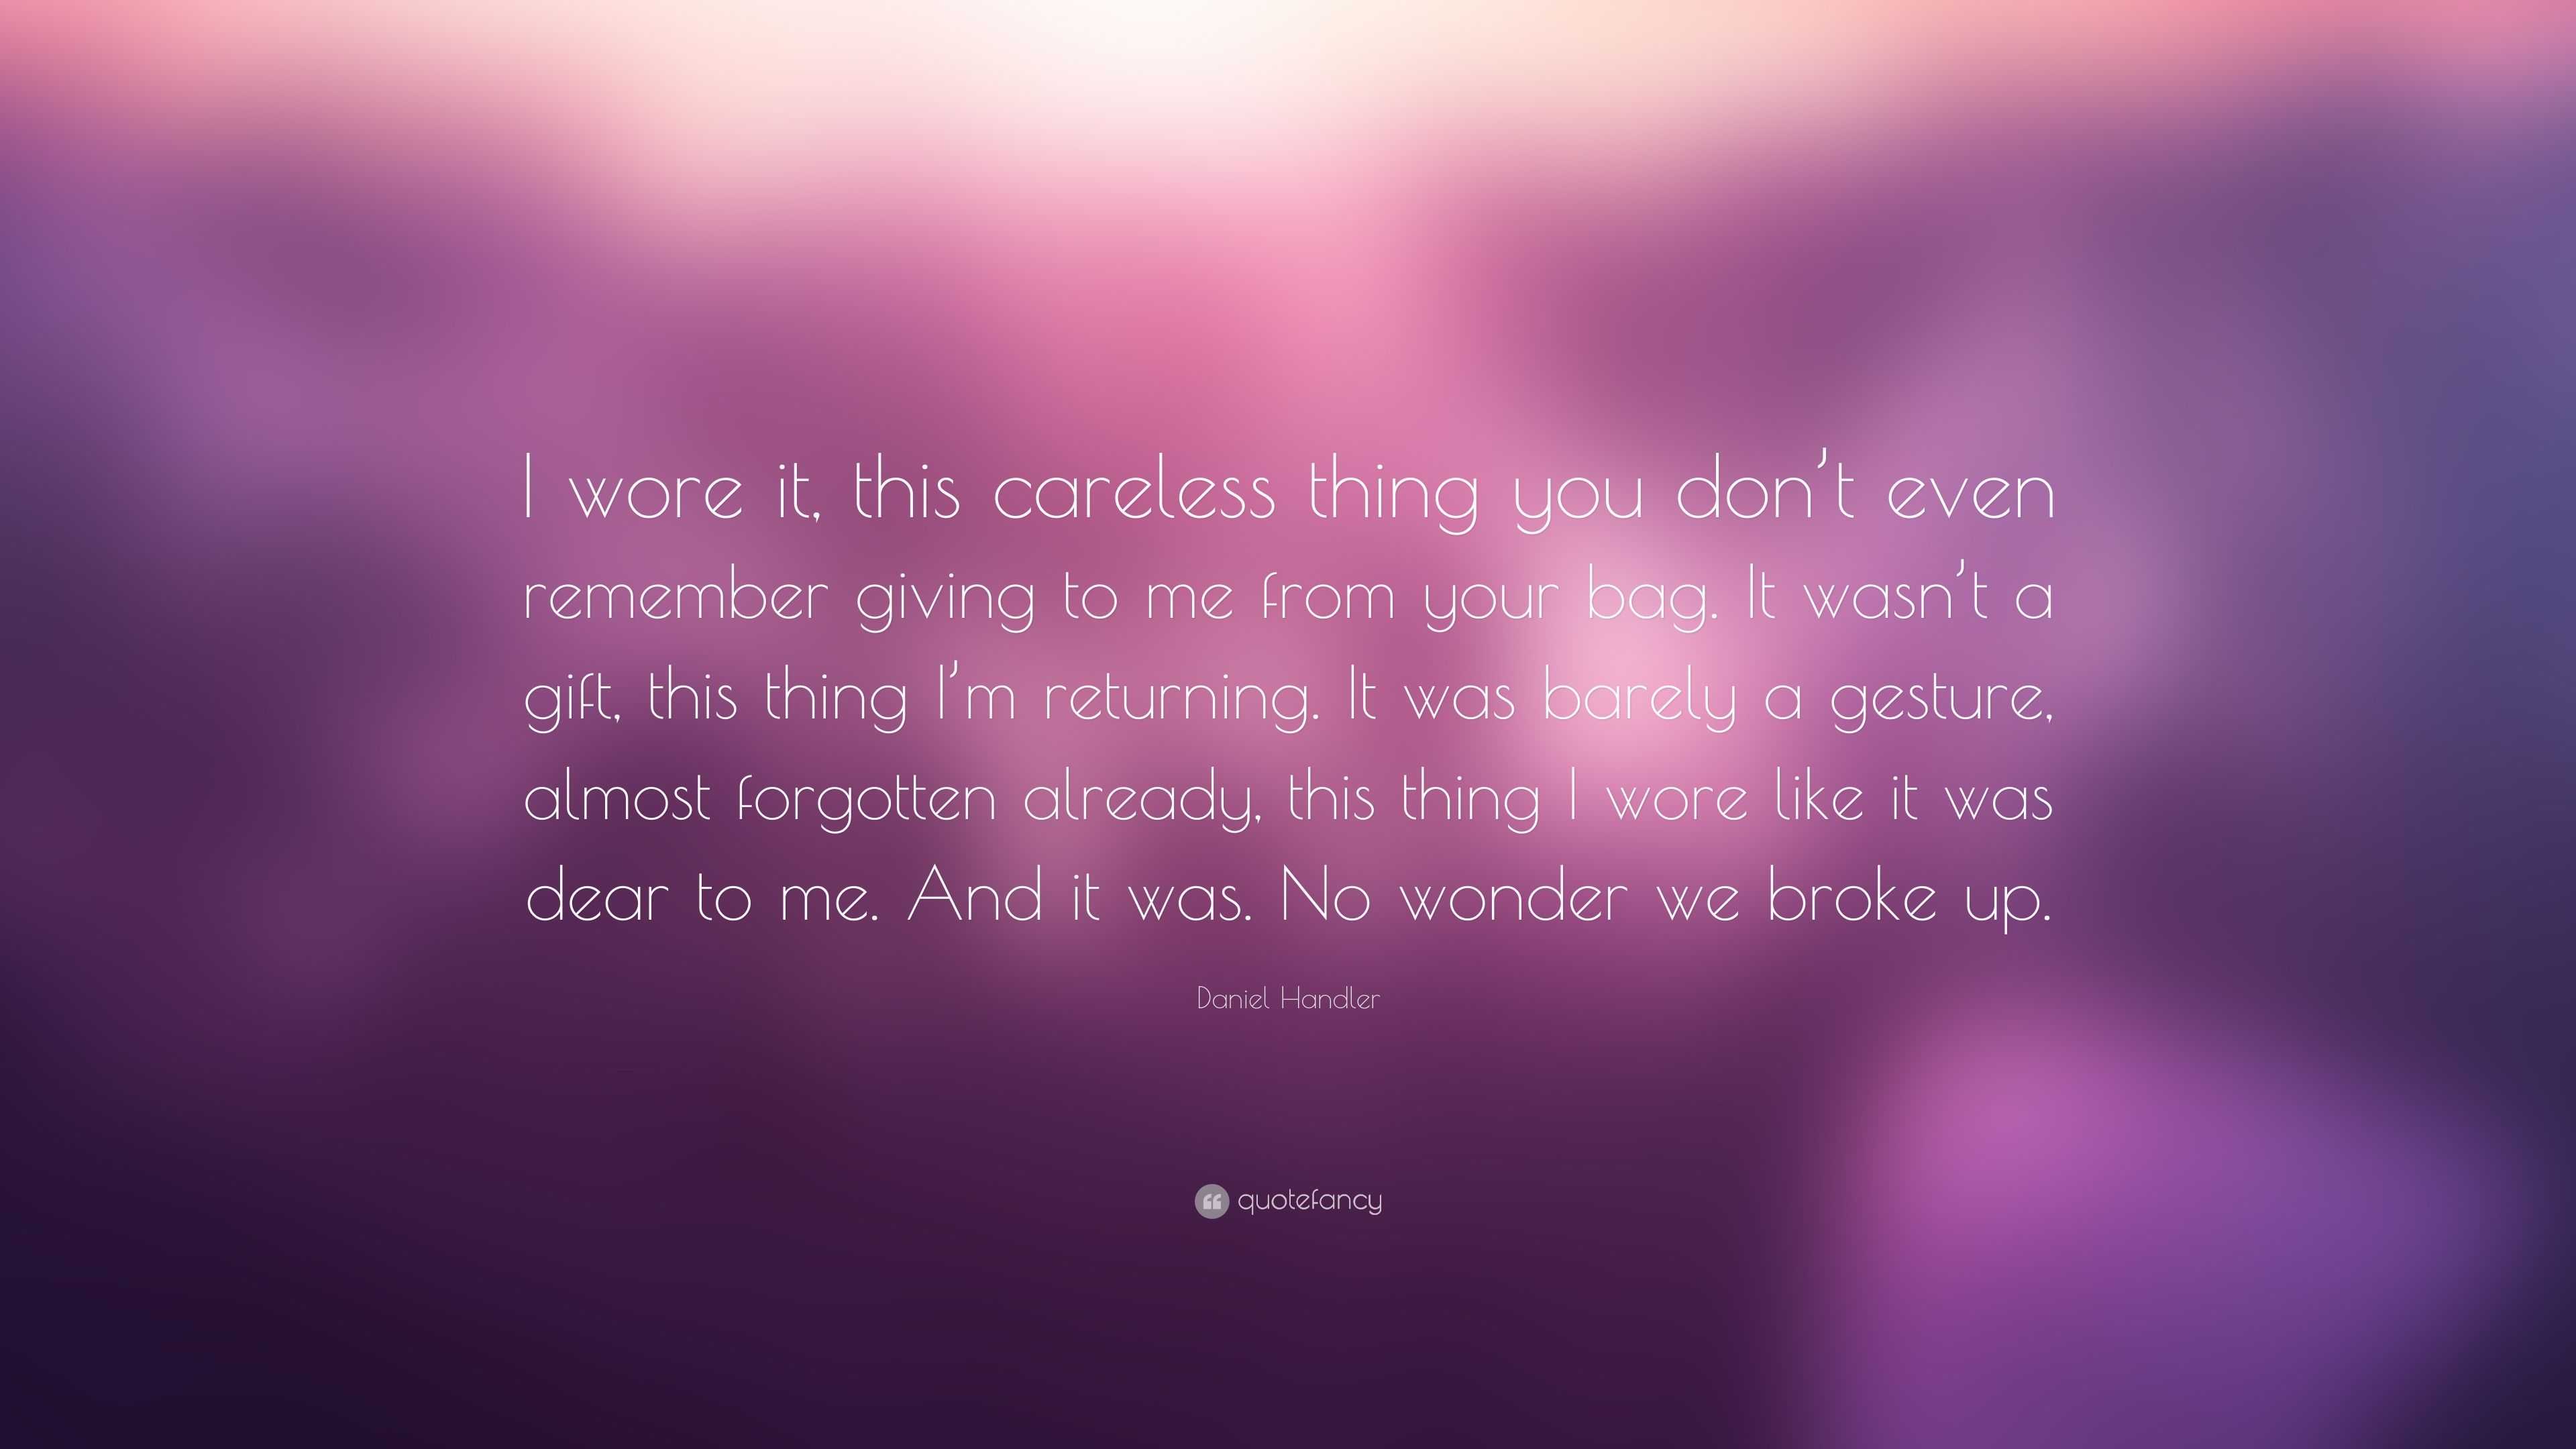 Daniel Handler Quote: “I wore it, this careless thing you don’t even ...